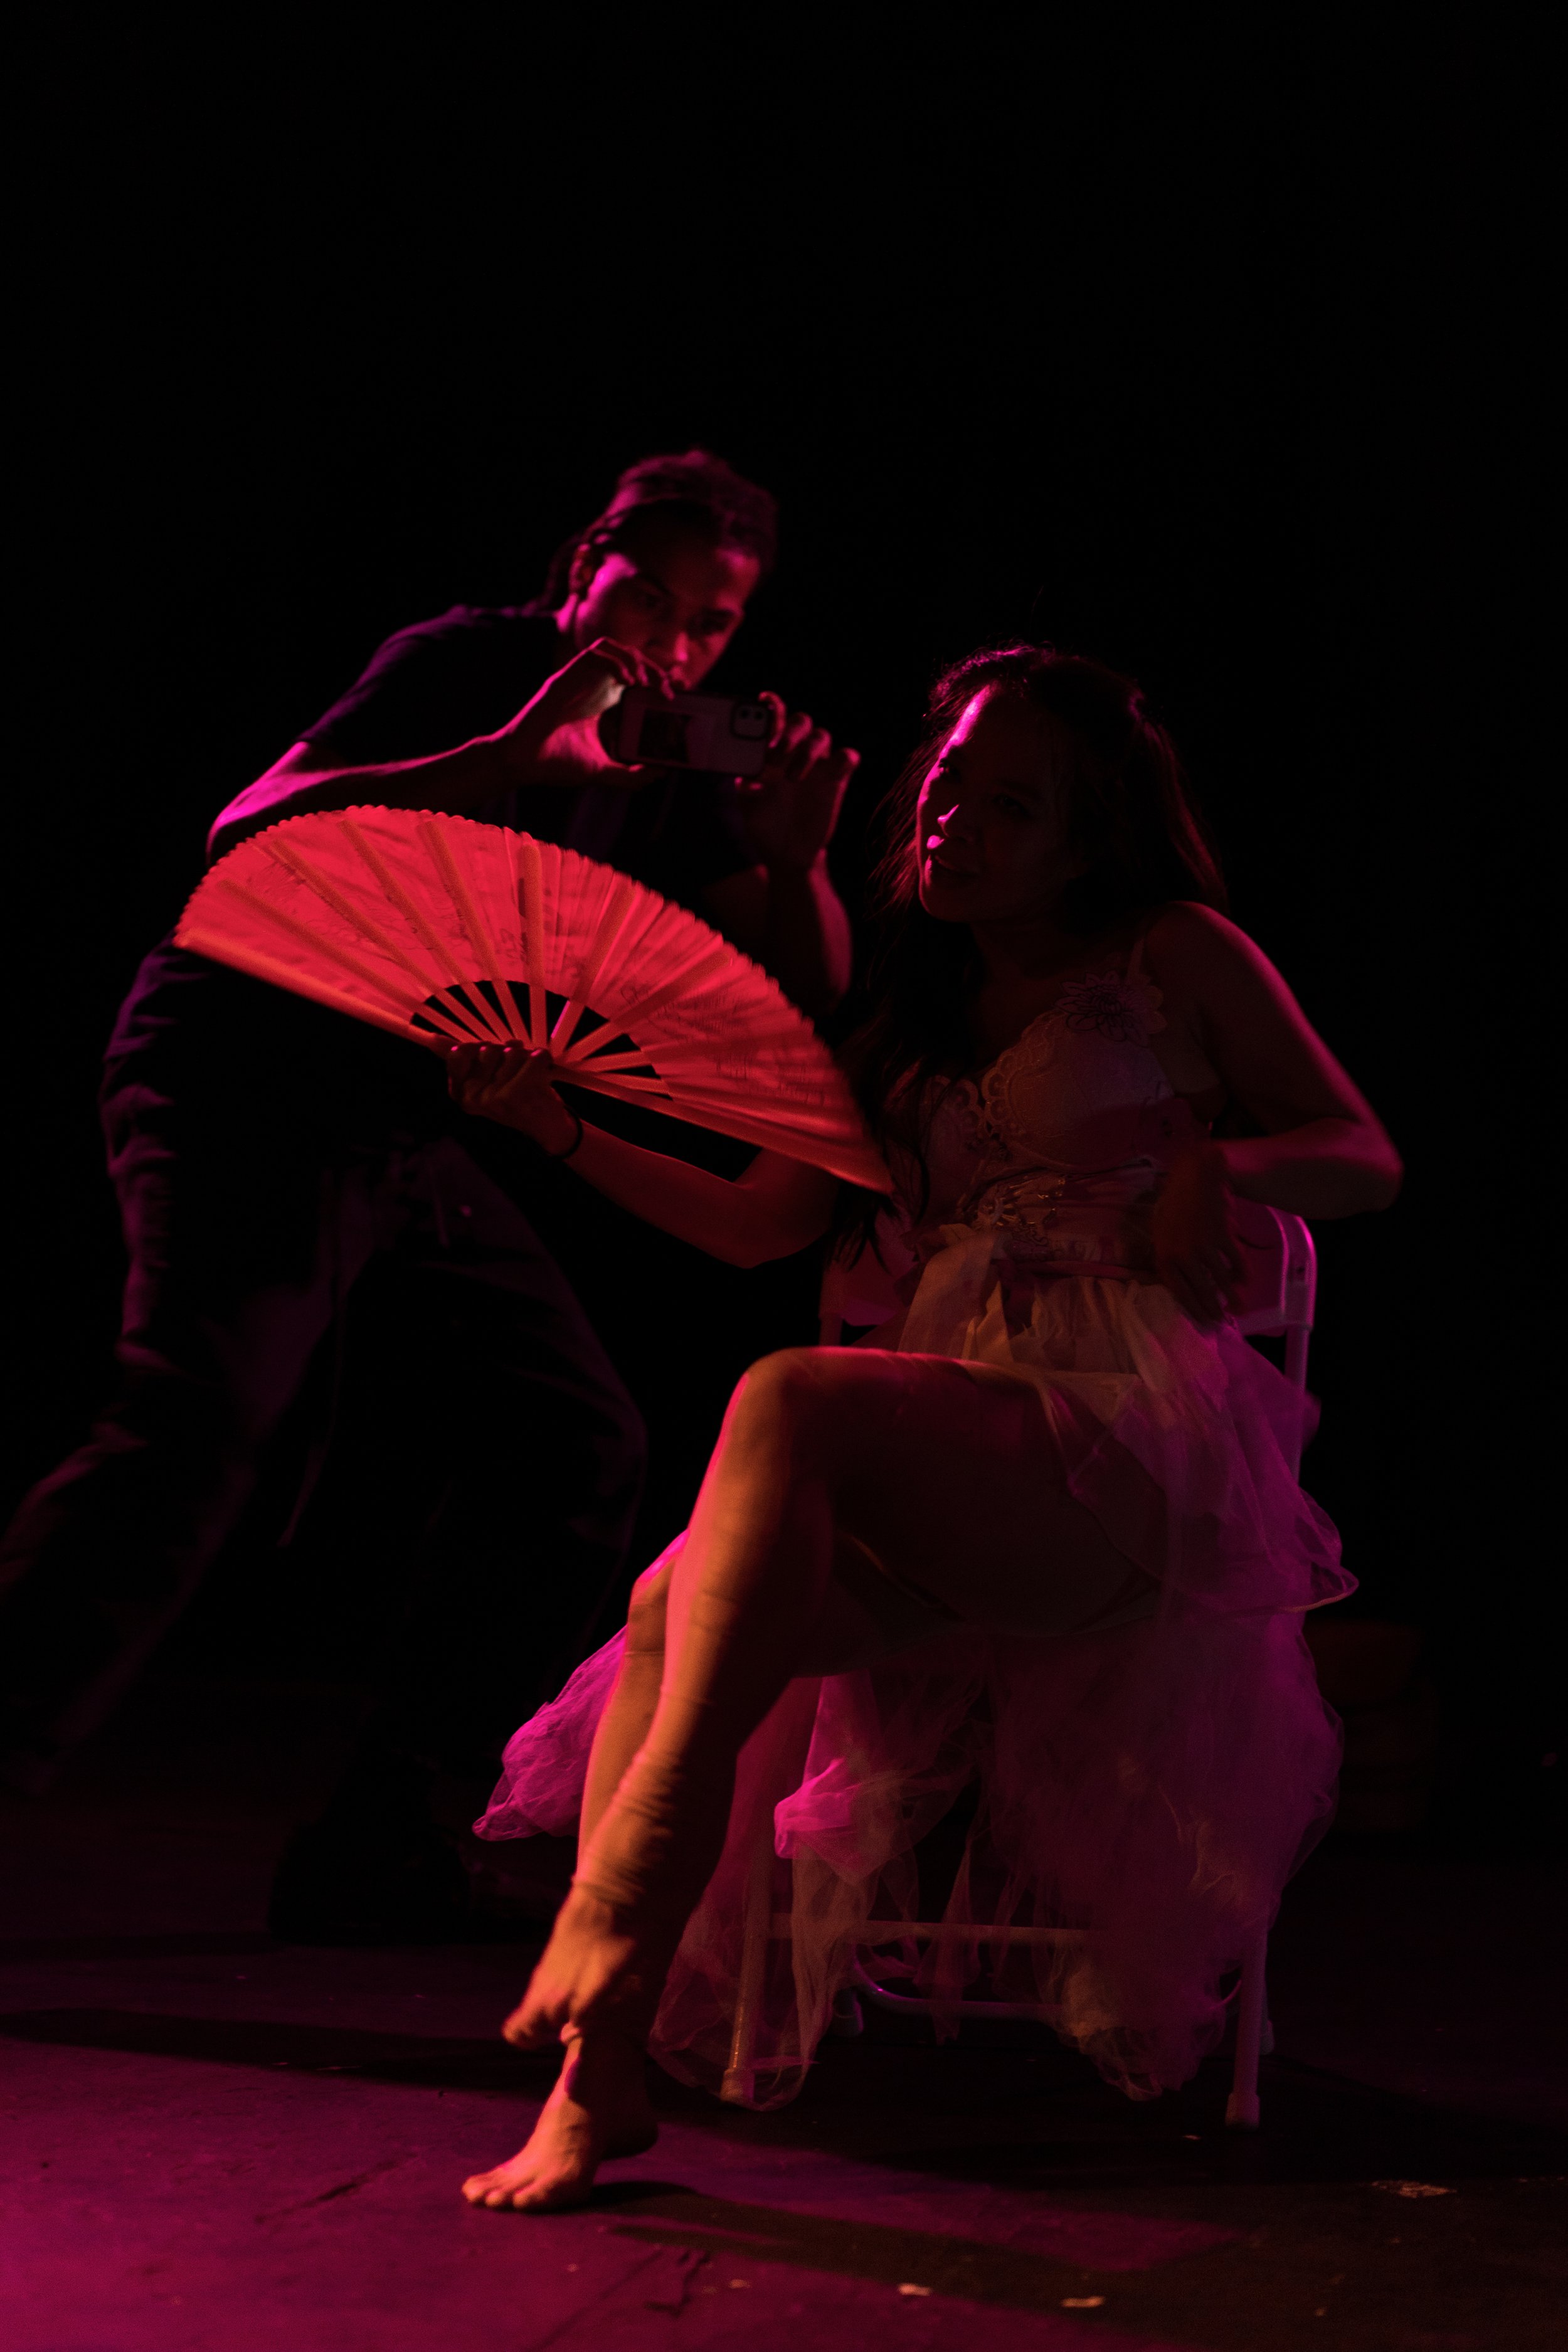  Bathed in a red light, a woman poses seductively on a chair whilst coquettishly holding a paper fan. A man in the background is taking a video of her on a phone. 